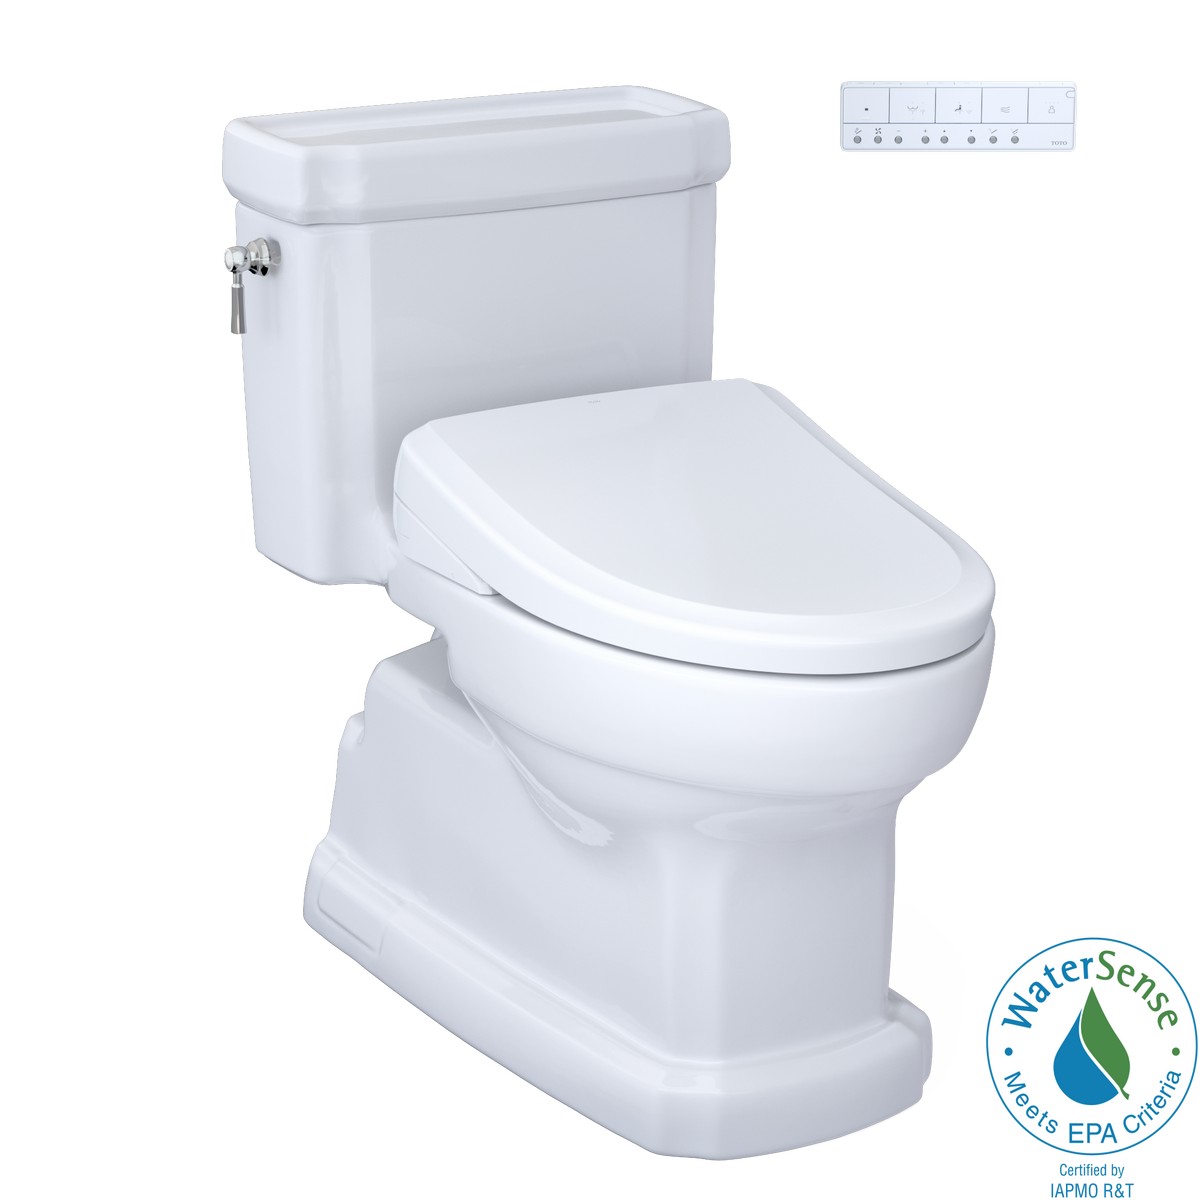 TOTO MW9744724CEF#01 WASHLET+ ECO GUINEVERE 1.28 GPF ELONGATED UNIVERSAL HEIGHT TOILET WITH WASHLET S7 BIDET SEAT IN COTTON WHITE